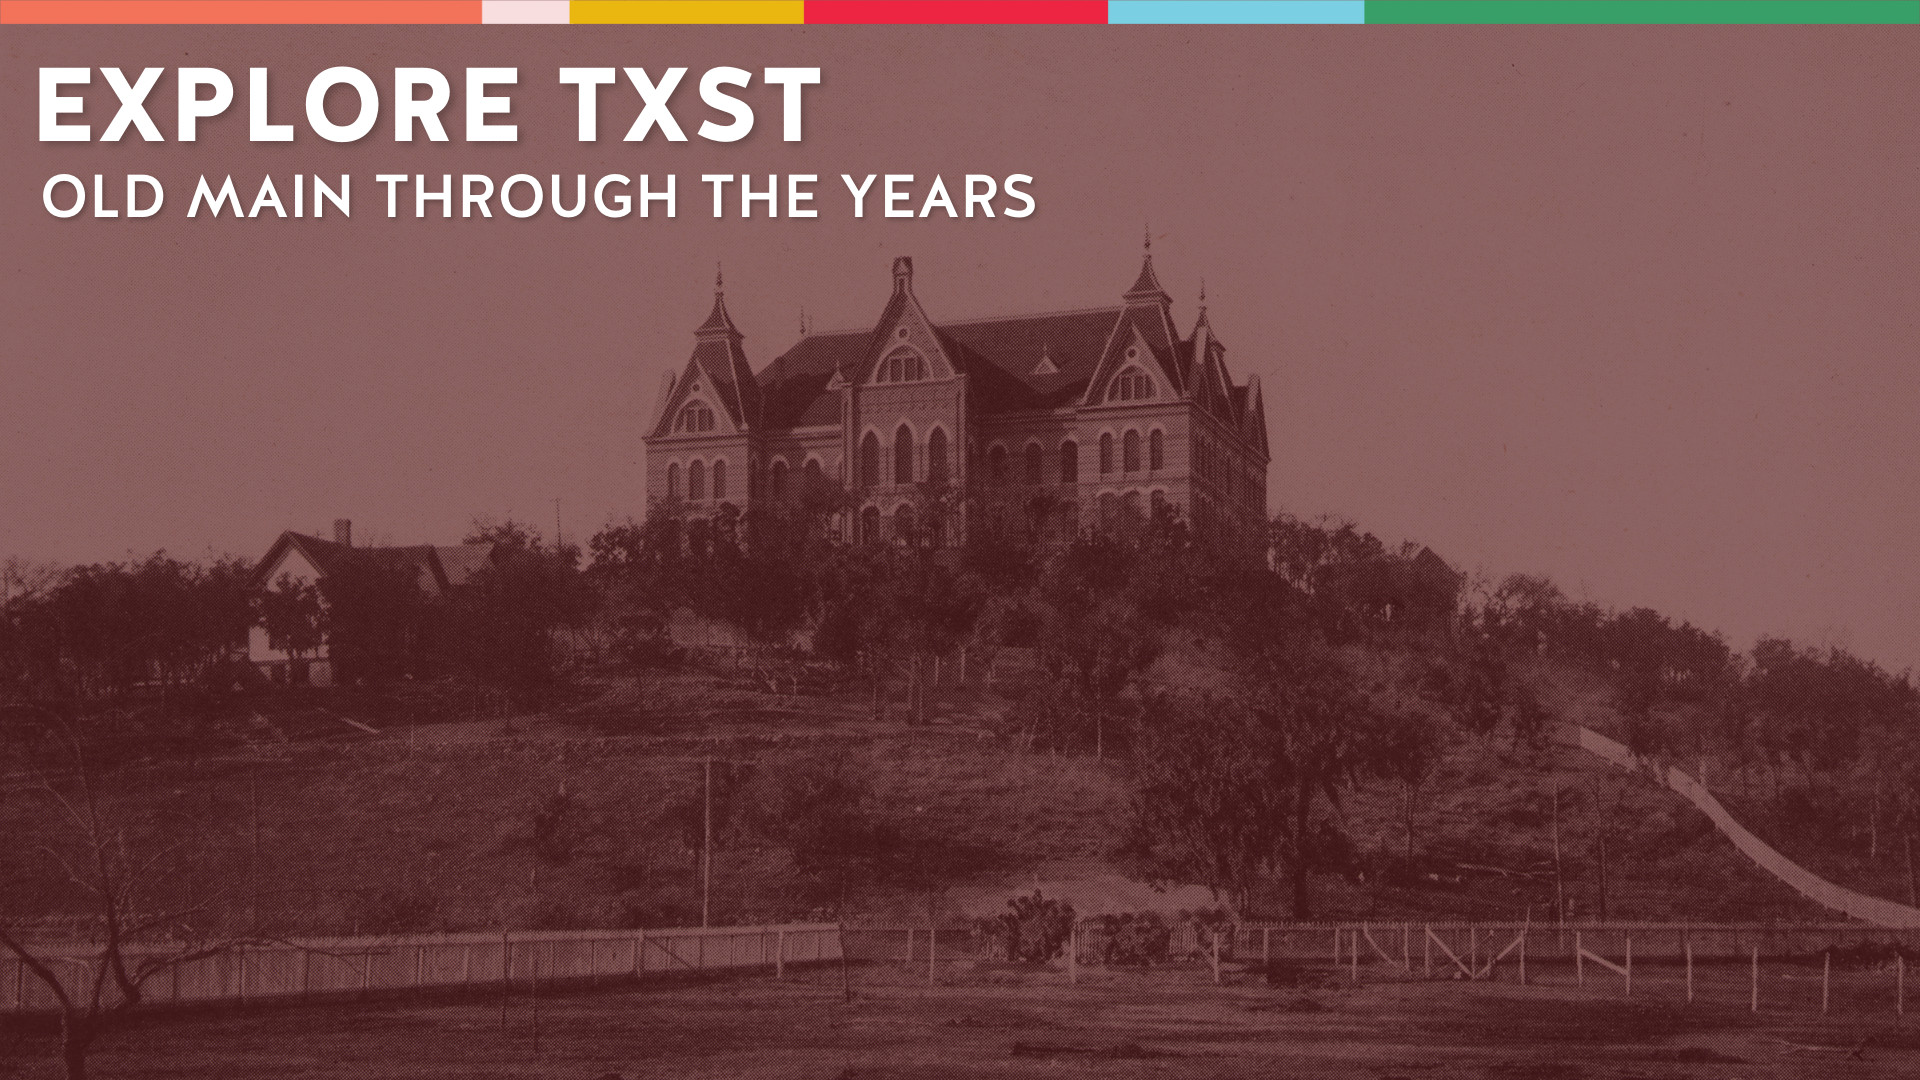 Old Main renovations through the years